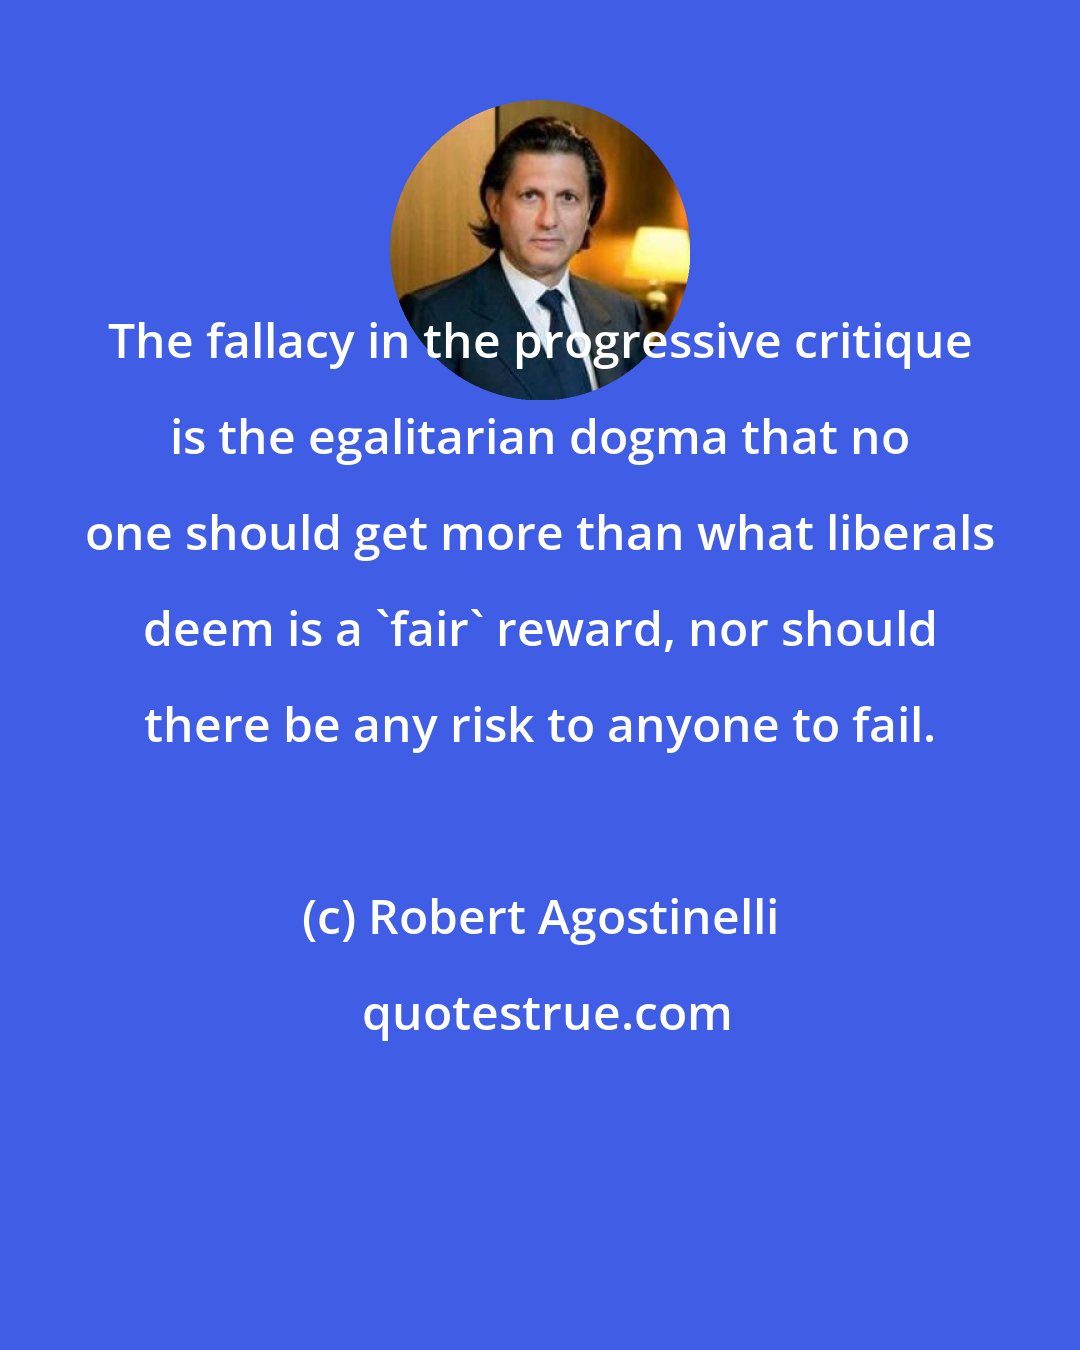 Robert Agostinelli: The fallacy in the progressive critique is the egalitarian dogma that no one should get more than what liberals deem is a 'fair' reward, nor should there be any risk to anyone to fail.